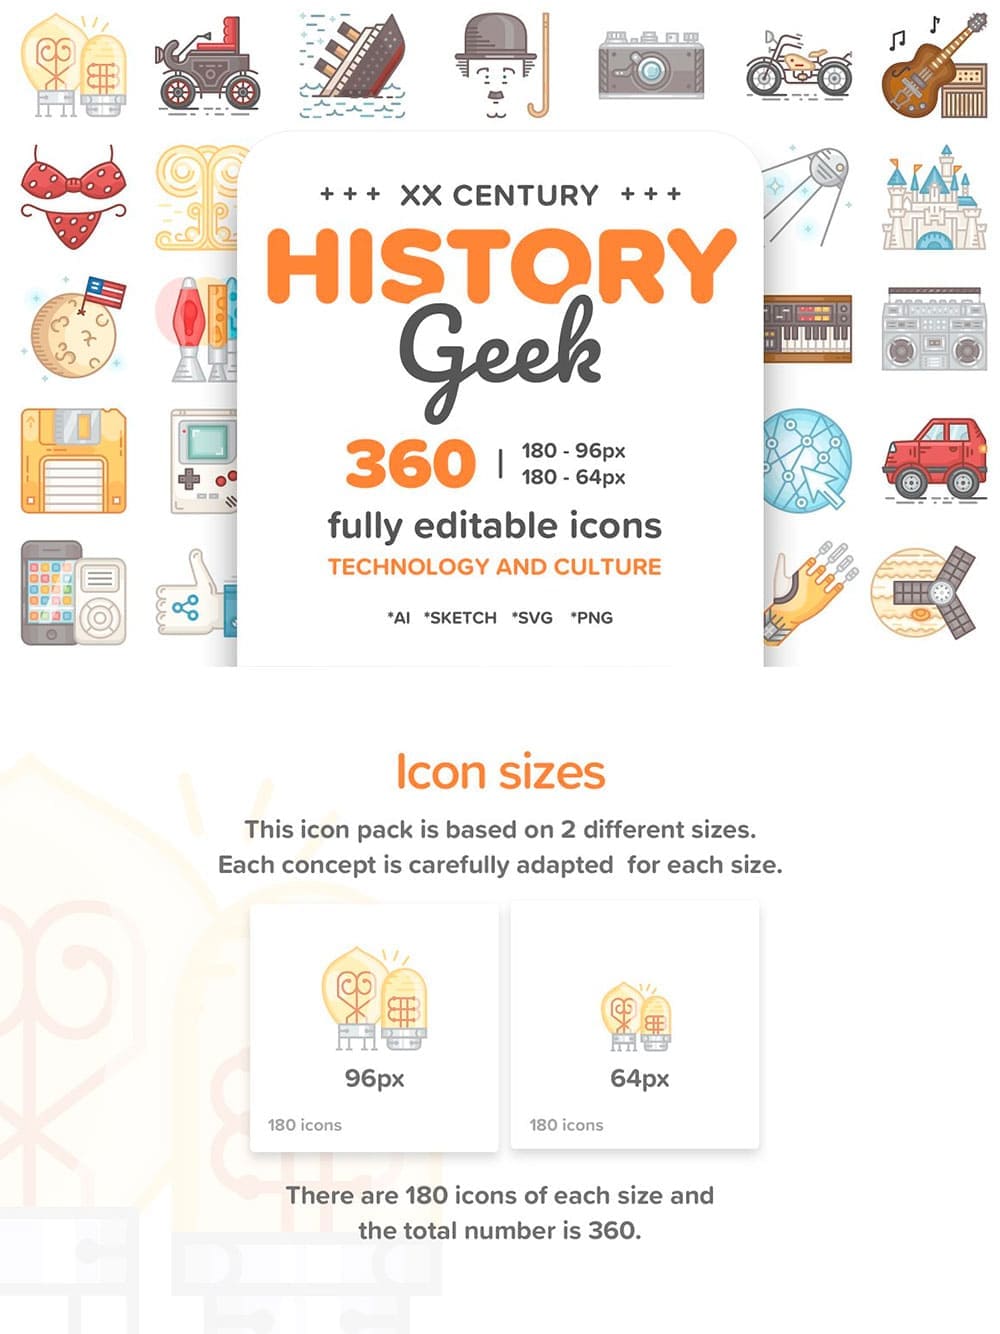 20 century history. color line icons, picture for pinterest.